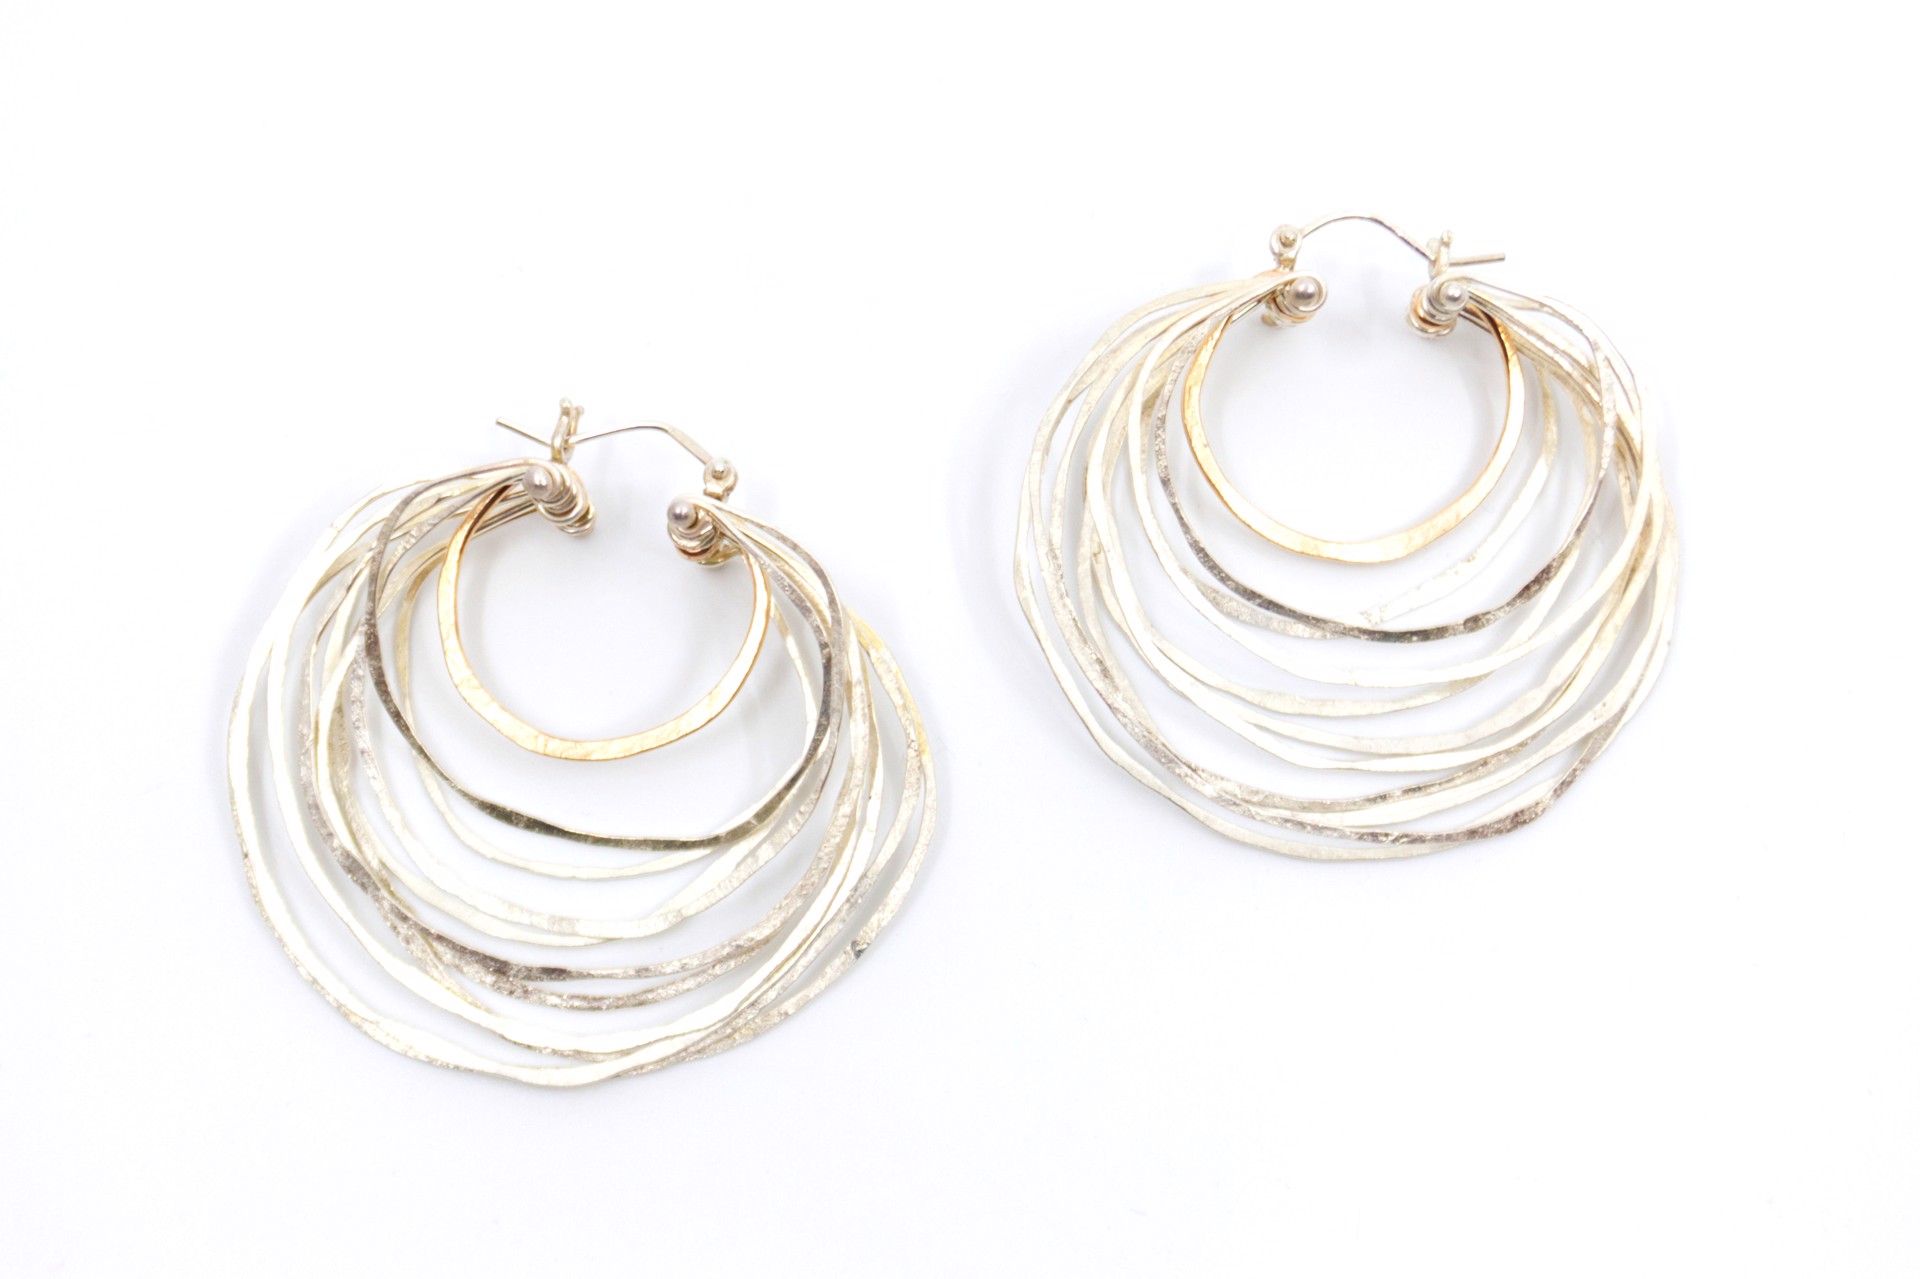 Large Crescent Earrings by Leia Zumbro